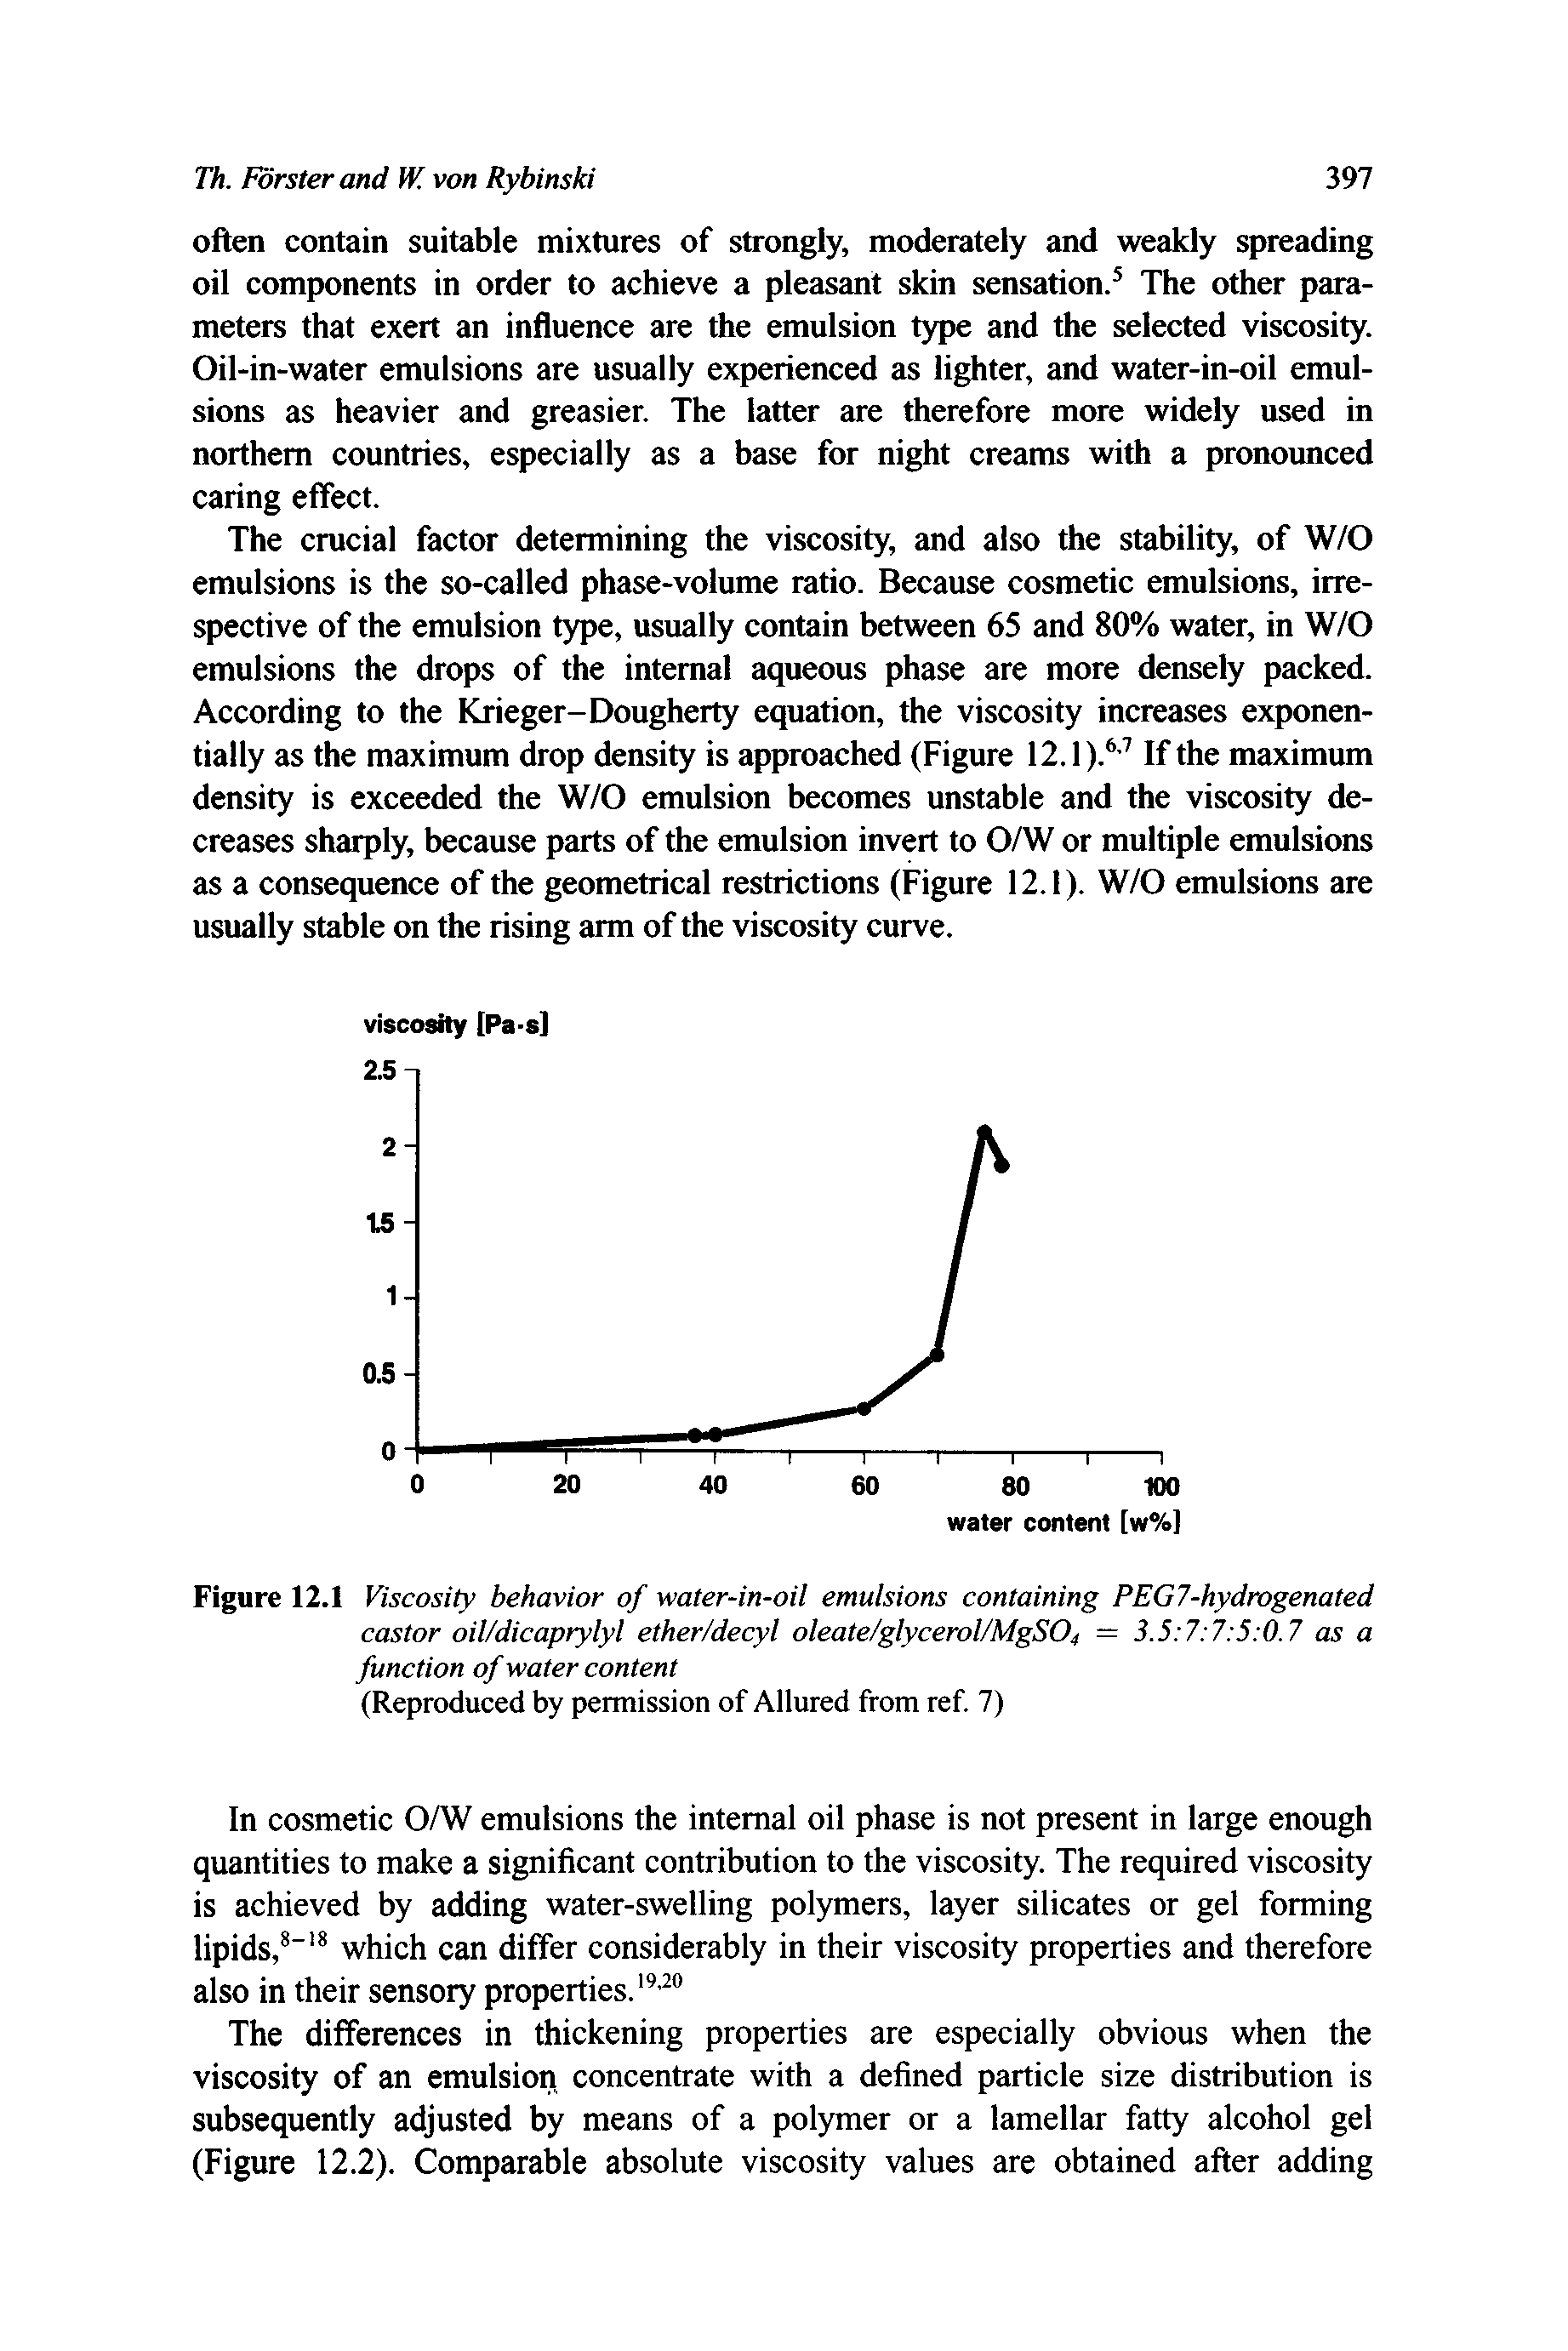 Figure 12.1 Viscosity behavior of water-in-oil emulsions containing PEG7-hydrogenated castor oil/dicaprylyl ether/decyl oleate/glycerol/MgS04 = 3.5 7 7 5 0.7 as a function of water content (Reproduced by permission of Allured from ref 7)...